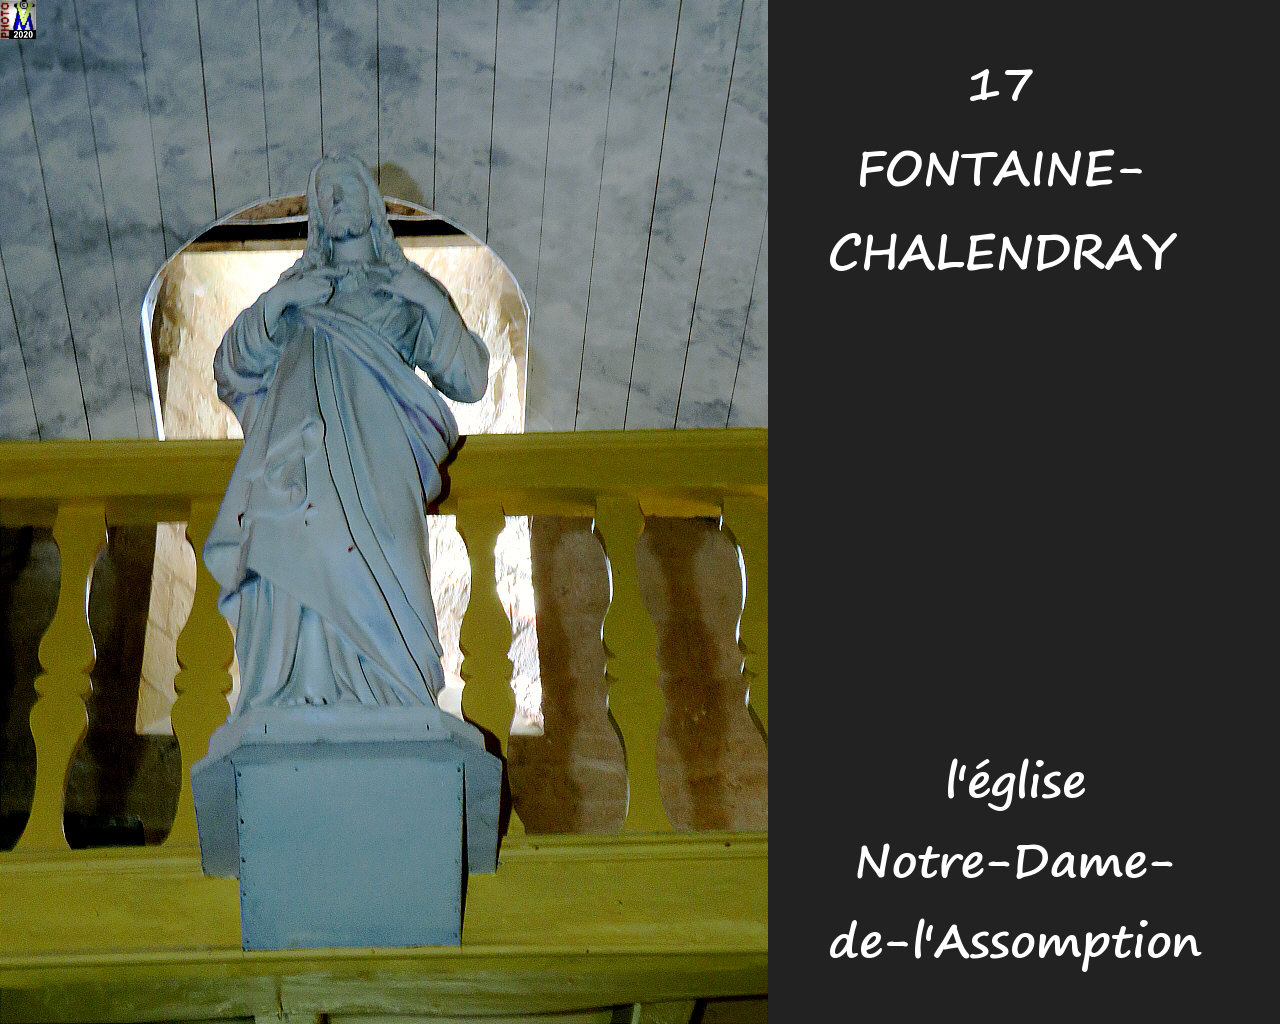 17FONTAINE-CHALENDRAY_eglise_1162.jpg